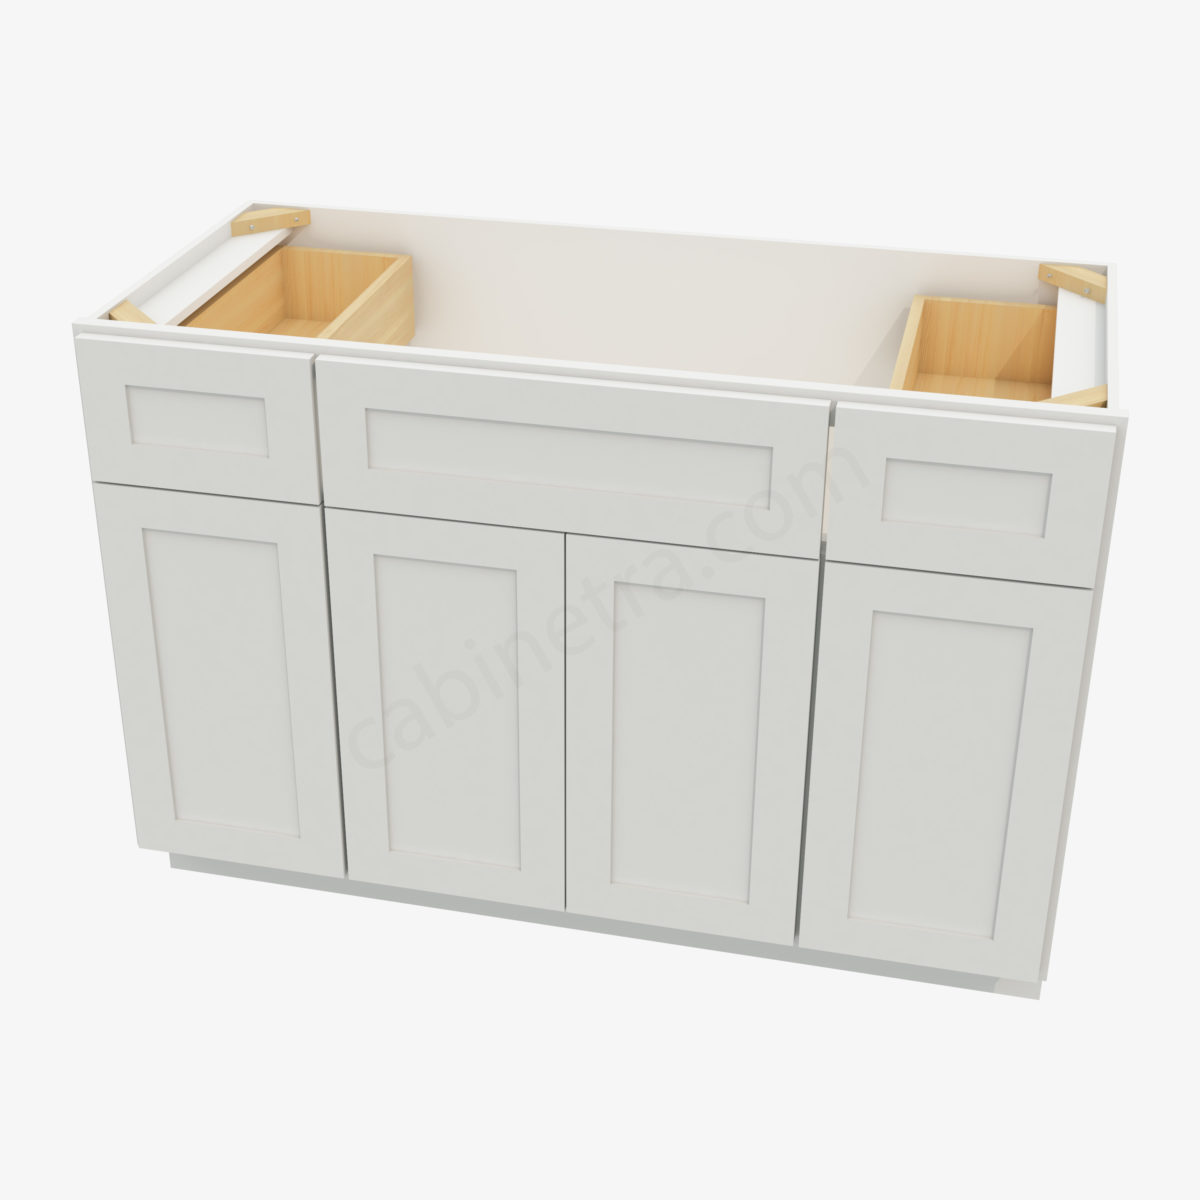 AW S4821B12D 34 3 Forevermark Ice White Shaker Cabinetra scaled